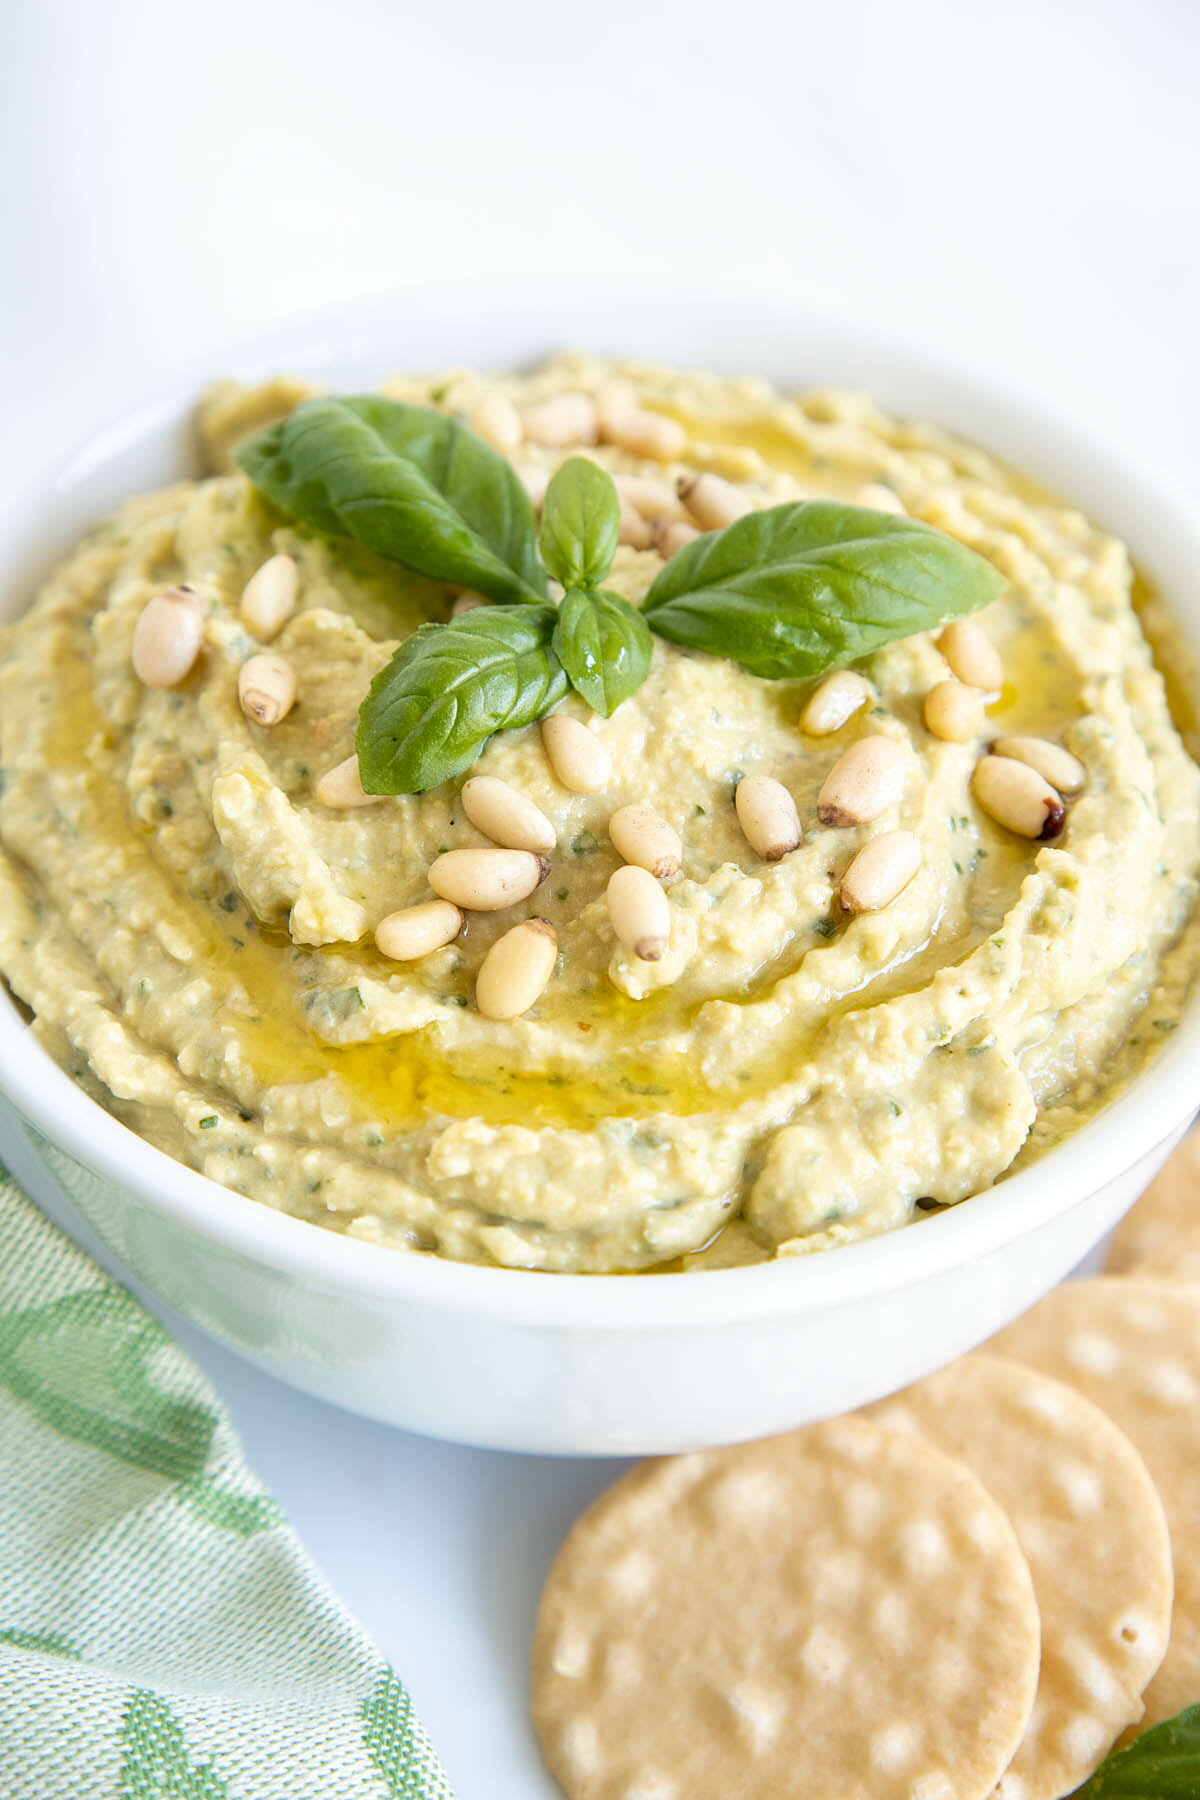 Basil Pesto Hummus in a bowl with crackers on a plate.